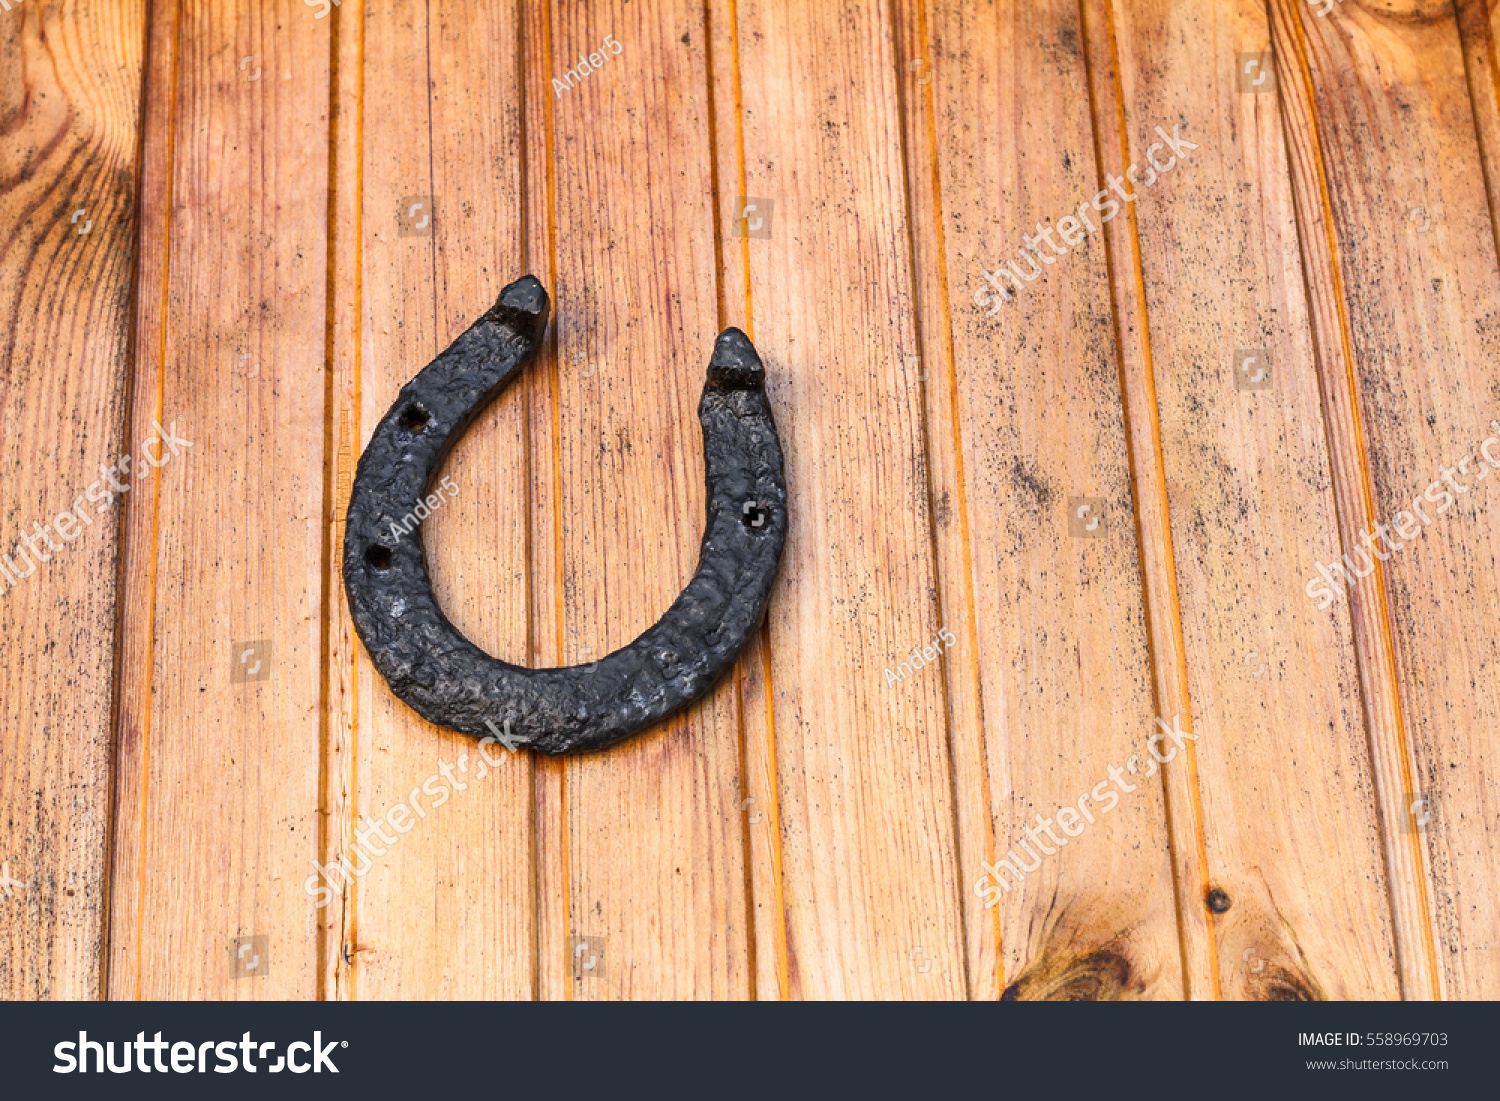 Old good luck horseshoe in black color nailed to wooden facing.
The horseshoe is probably one of the most well-known good luck and protective symbols of the Western world. #558969703